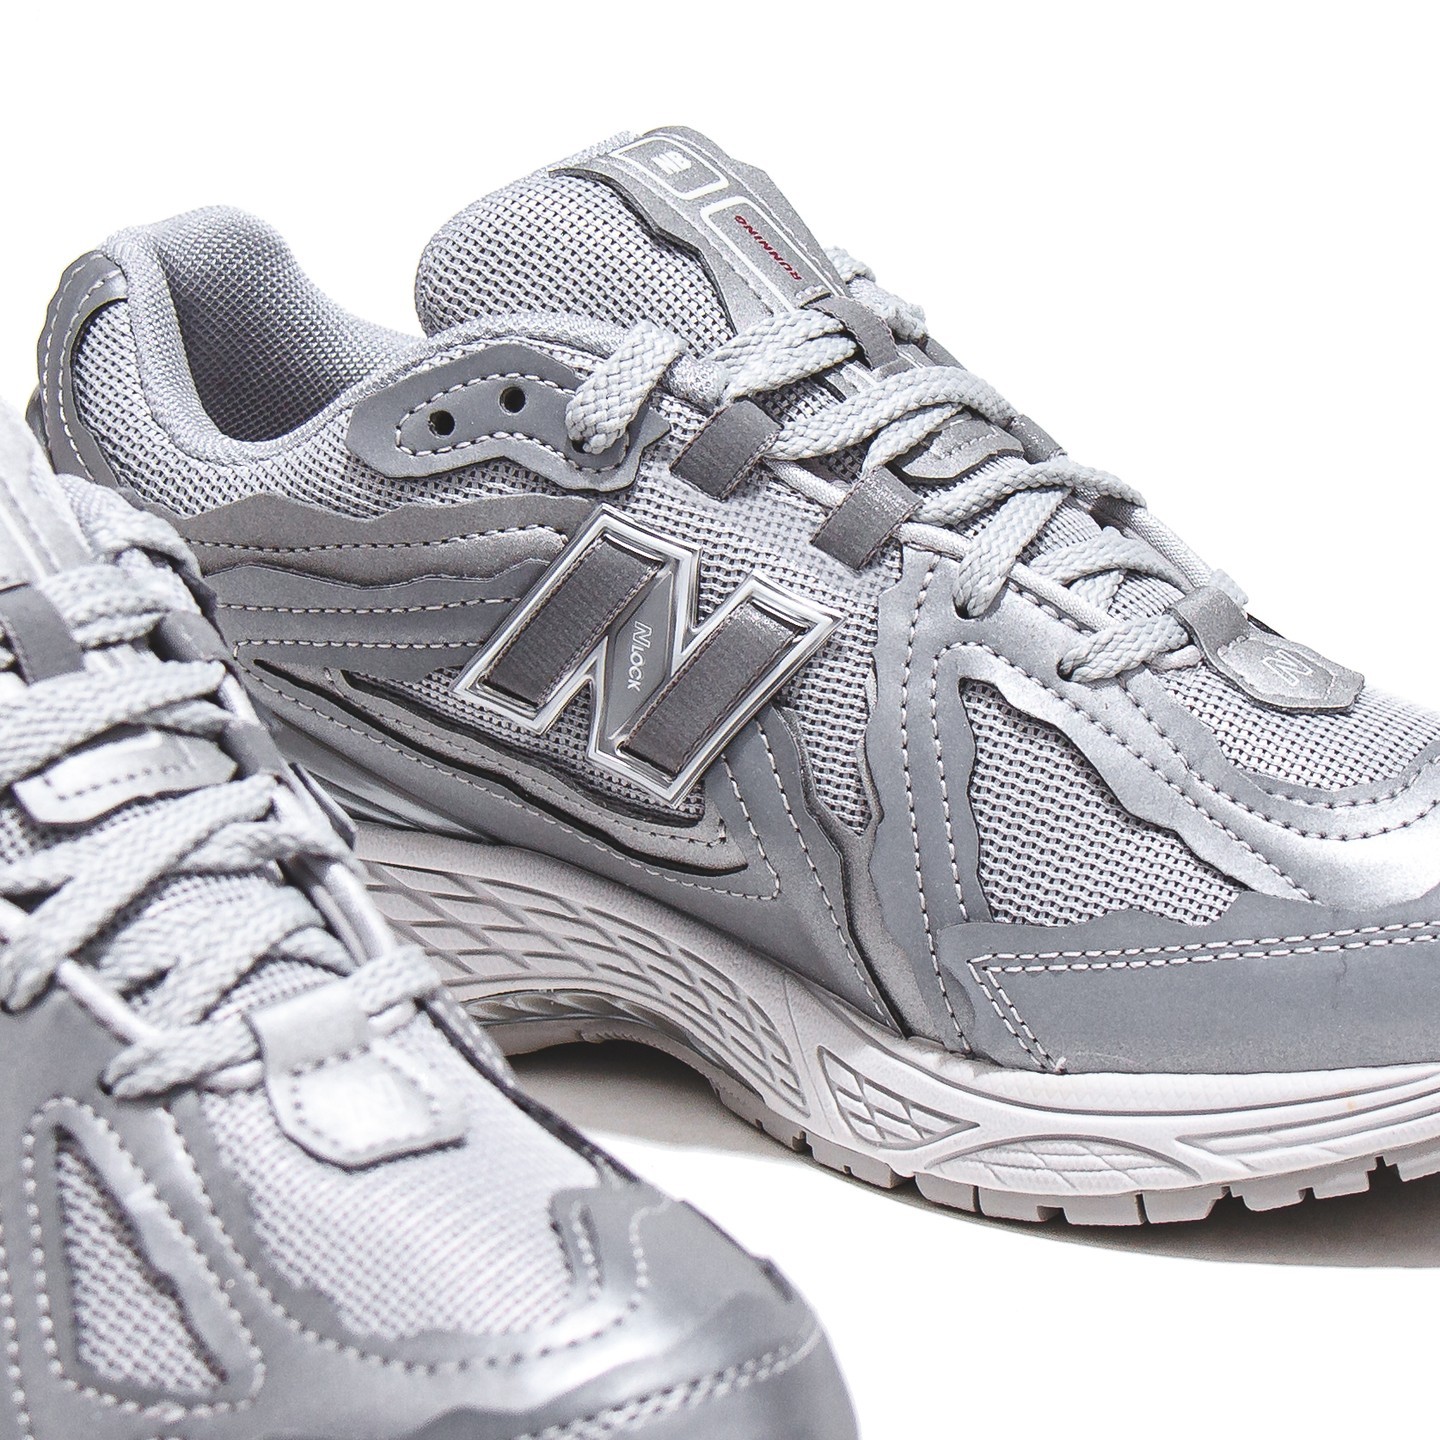 New Balance's 1906r Protection pack sneaker in a metallic silver colorway